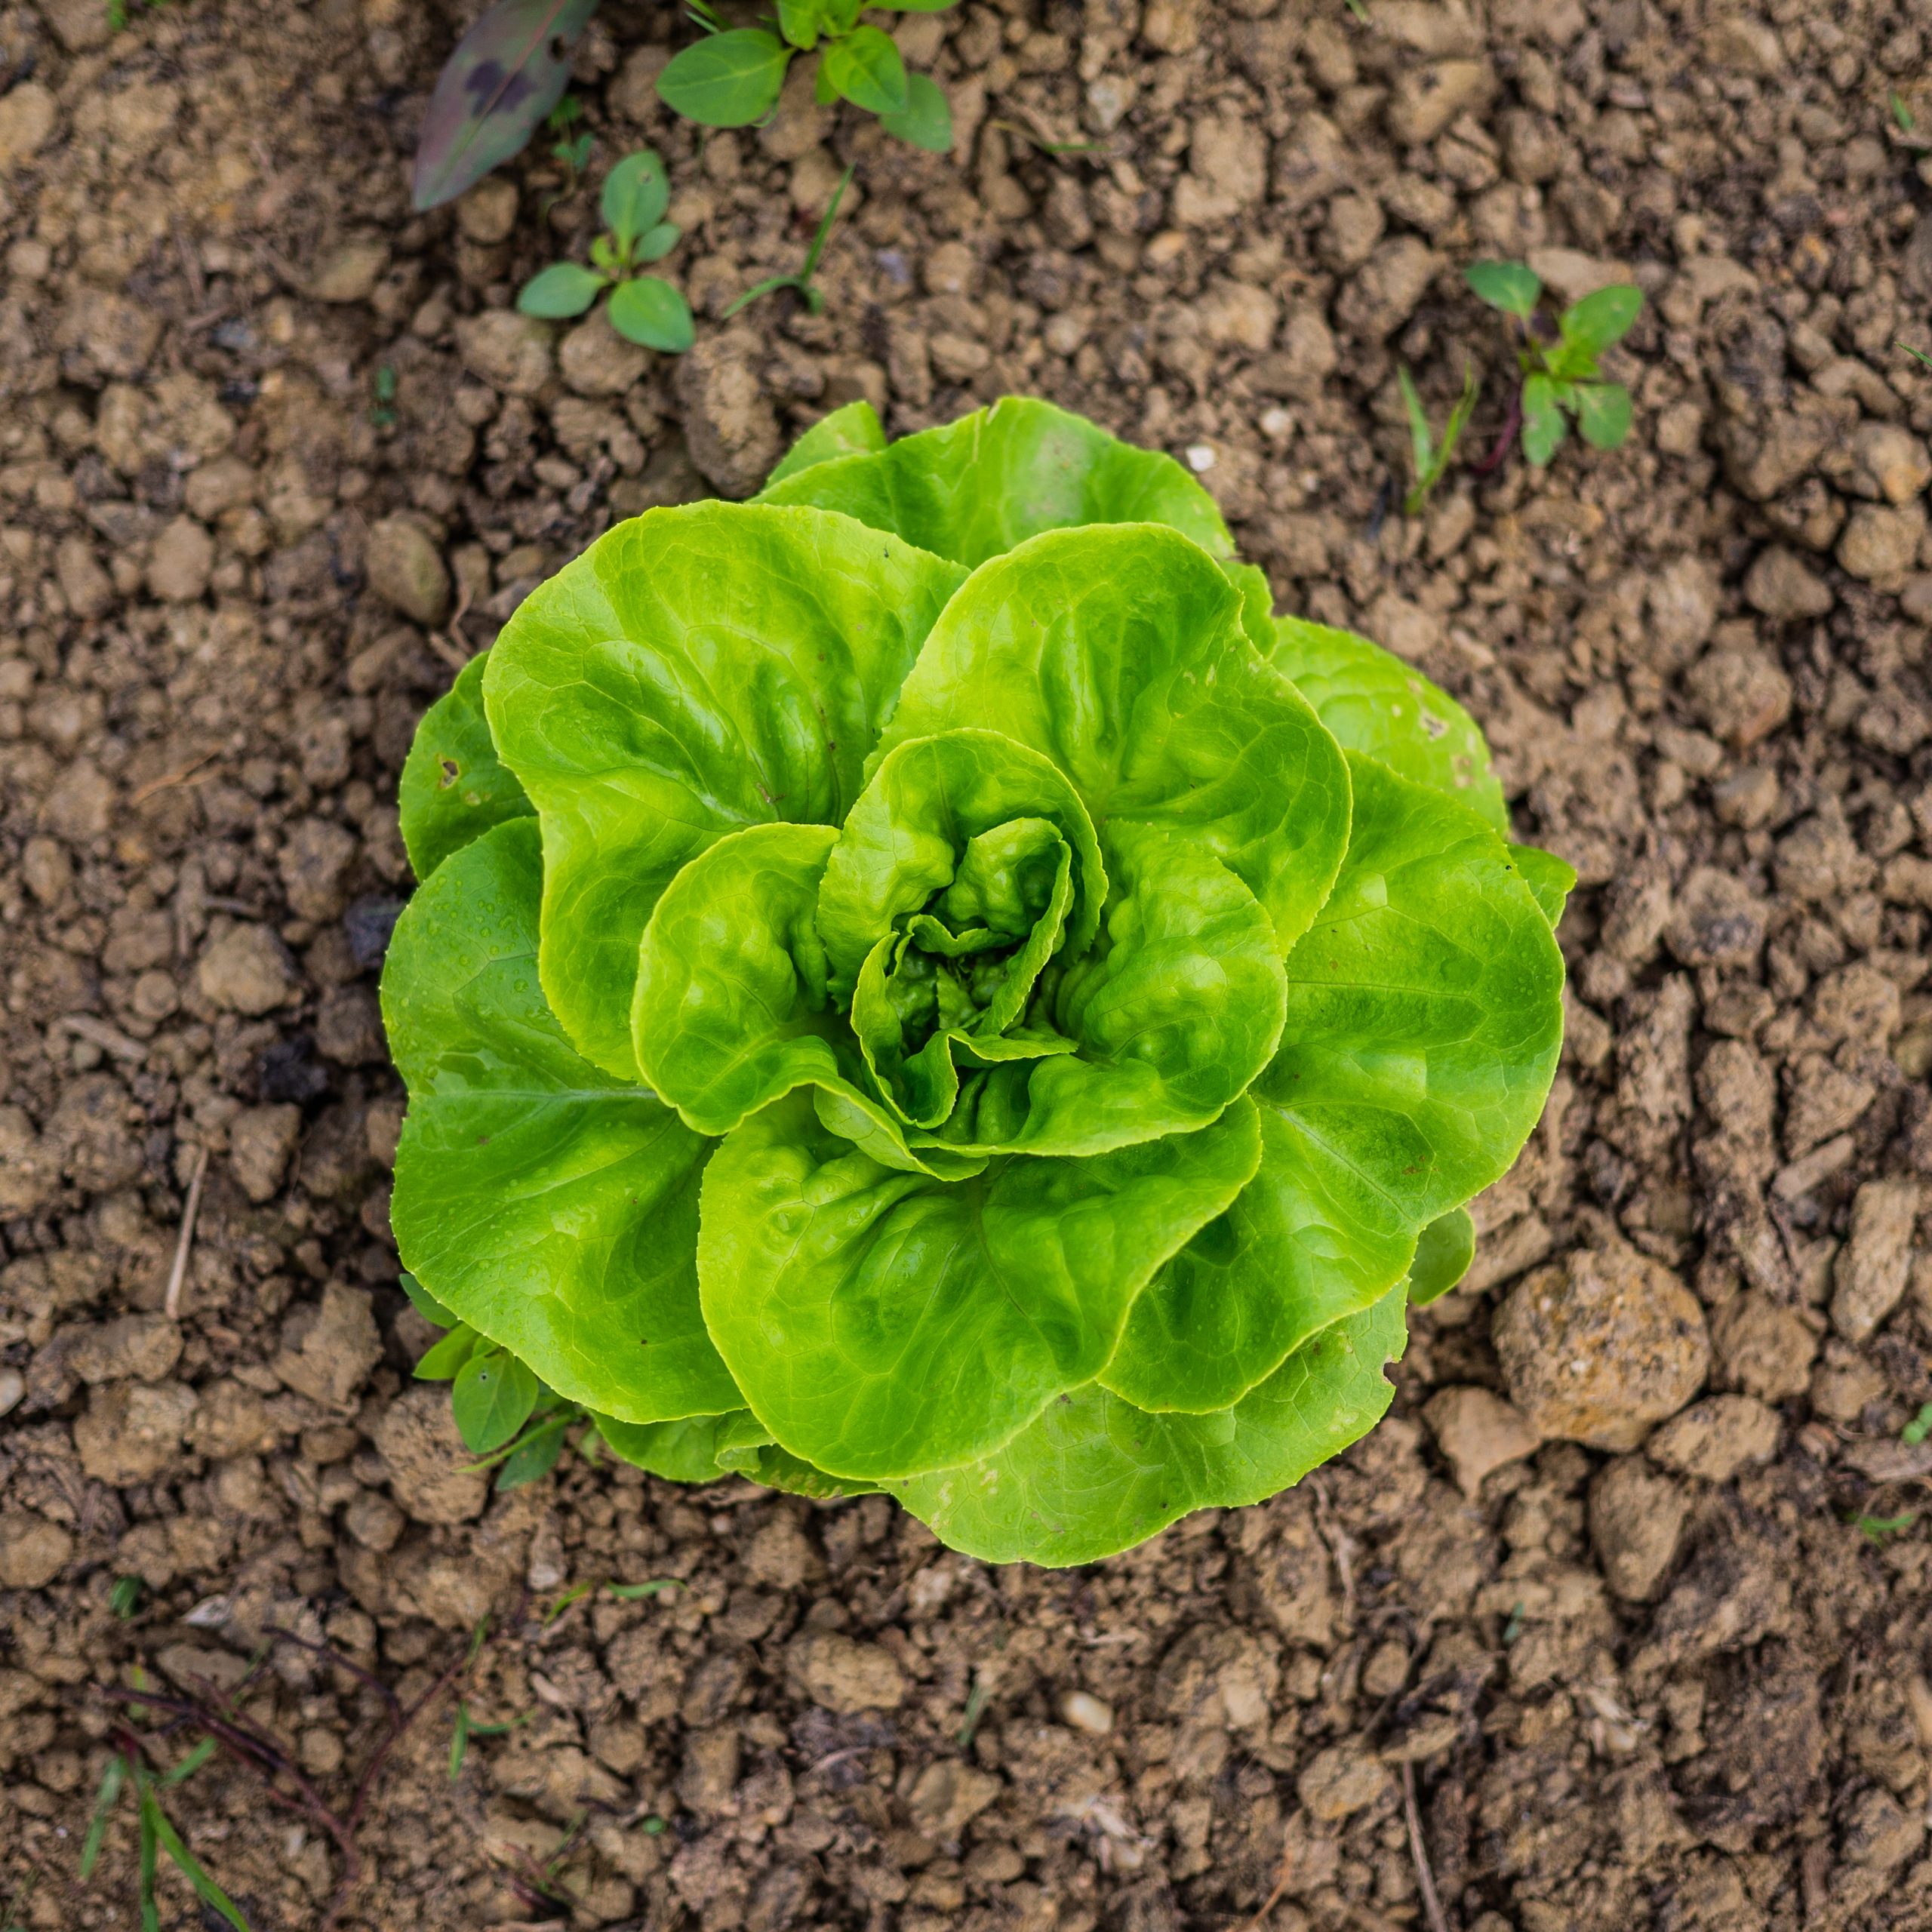 How Much Does One Lettuce Plant Yield?